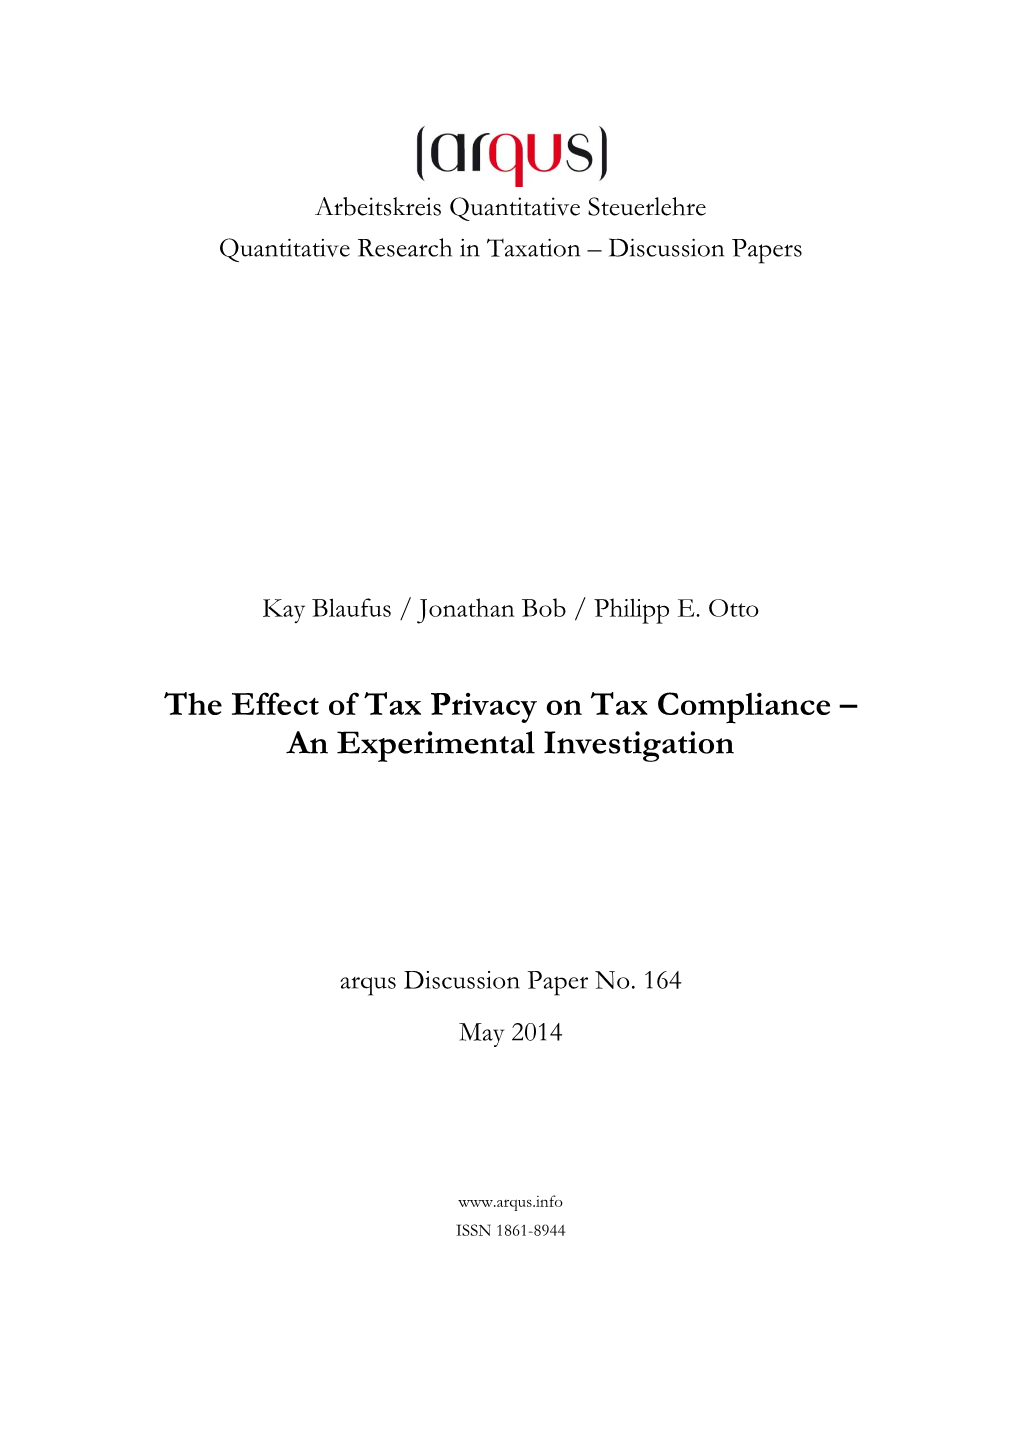 The Effect of Tax Privacy on Tax Compliance – an Experimental Investigation